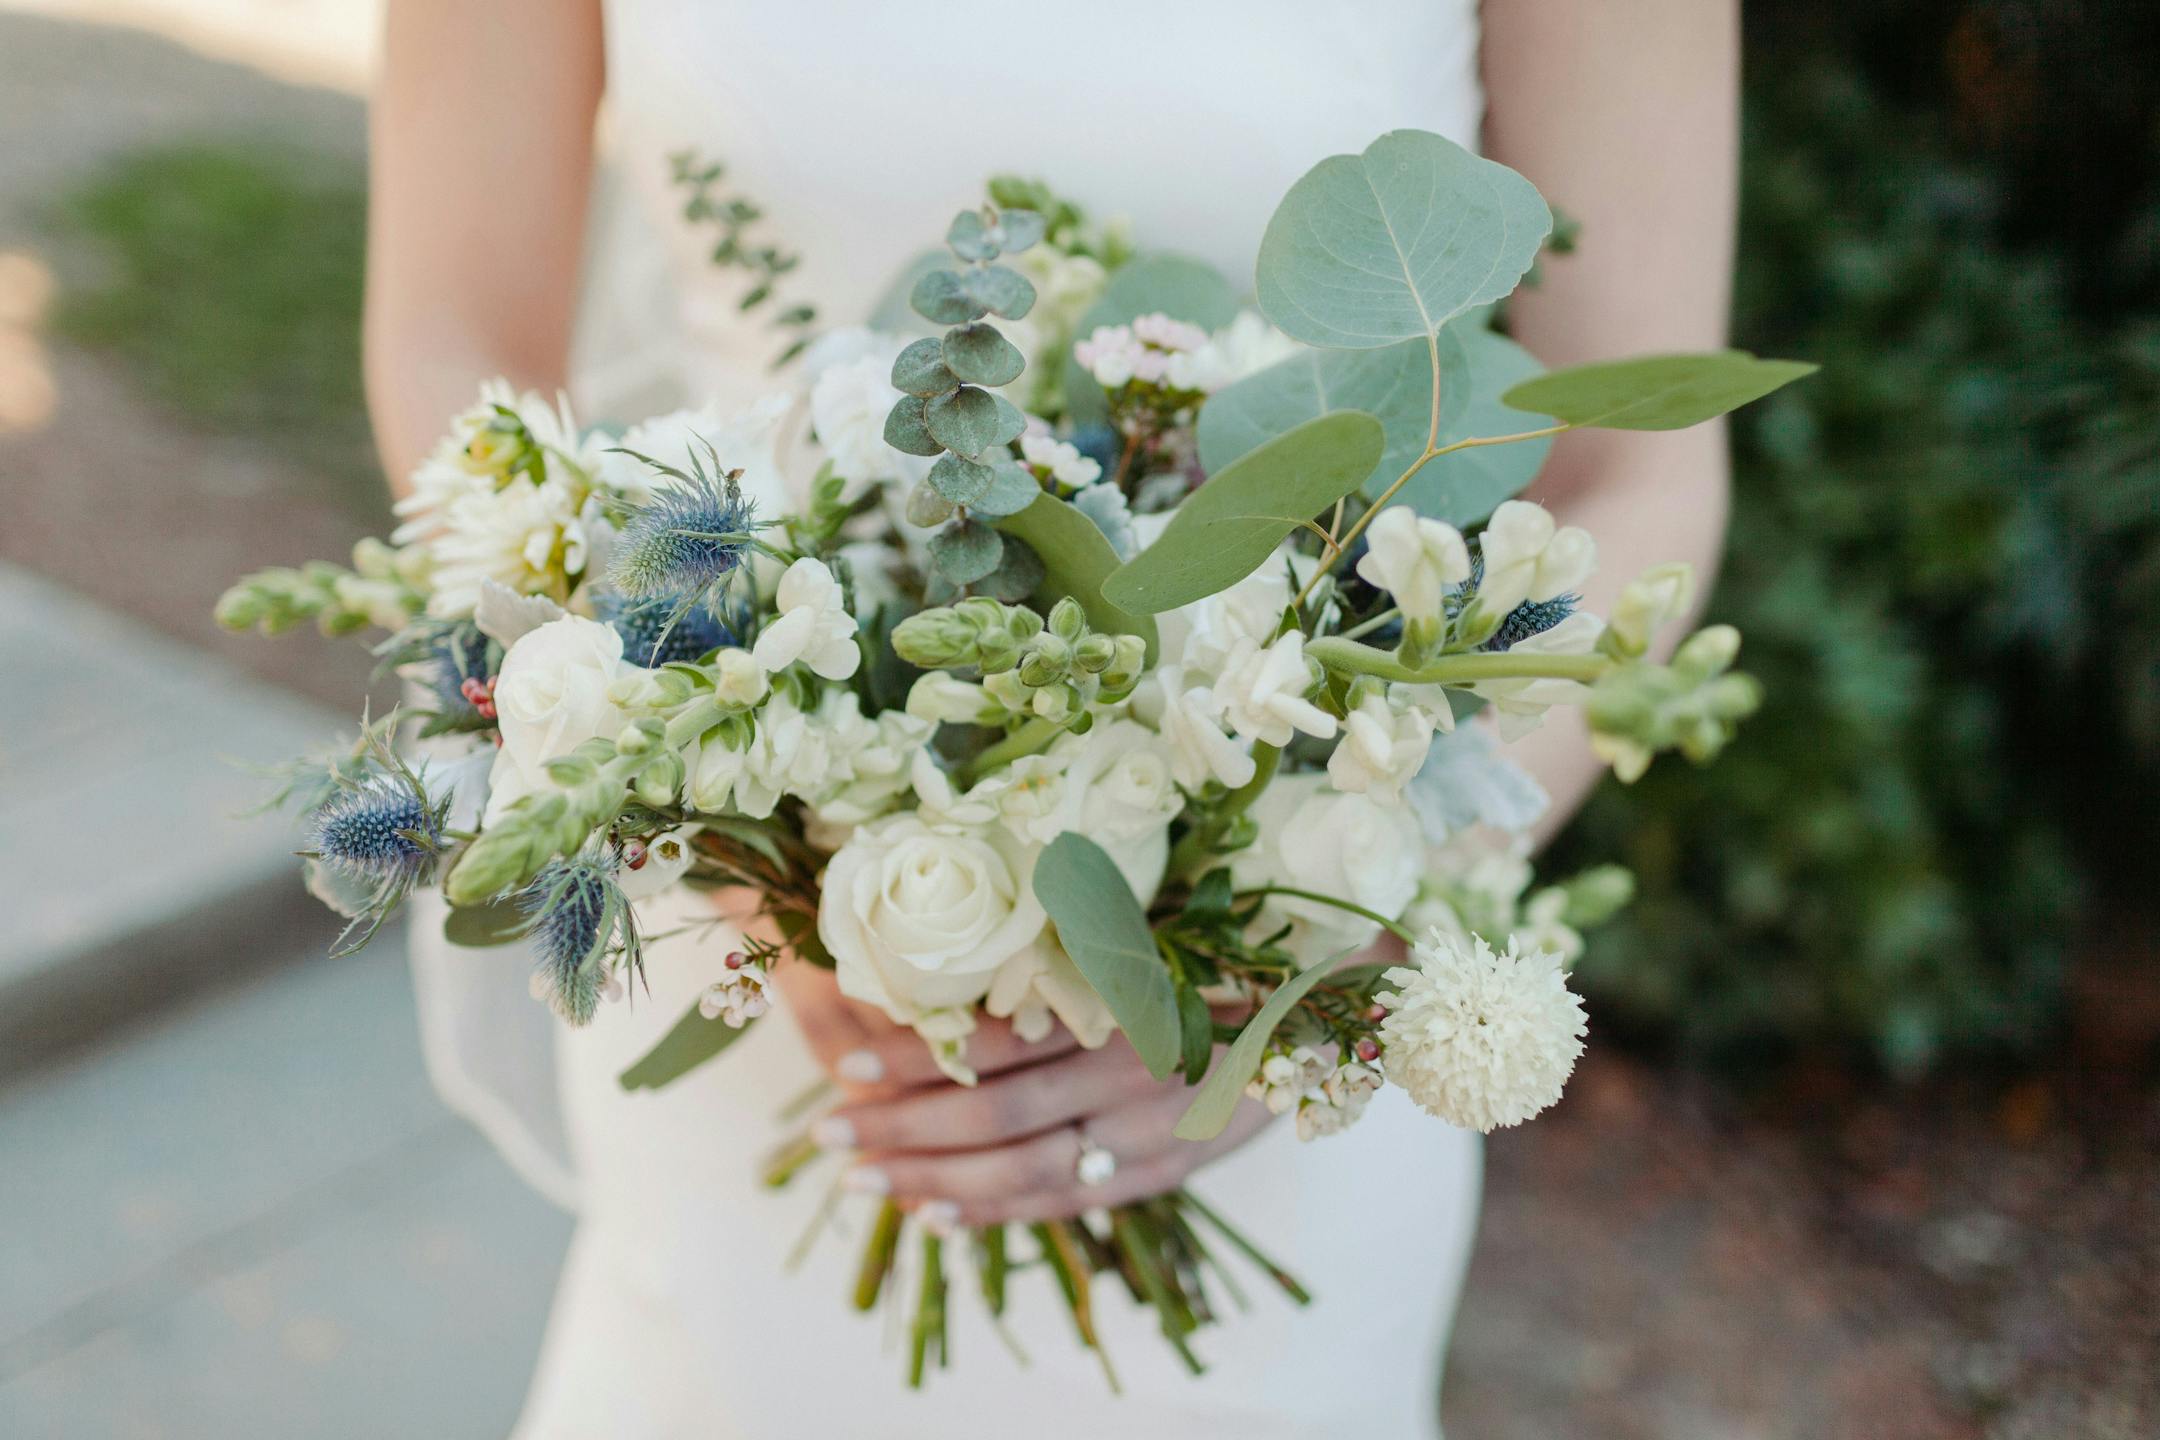 Woman in wedding dress holding white wedding bouquet with eucalyptus